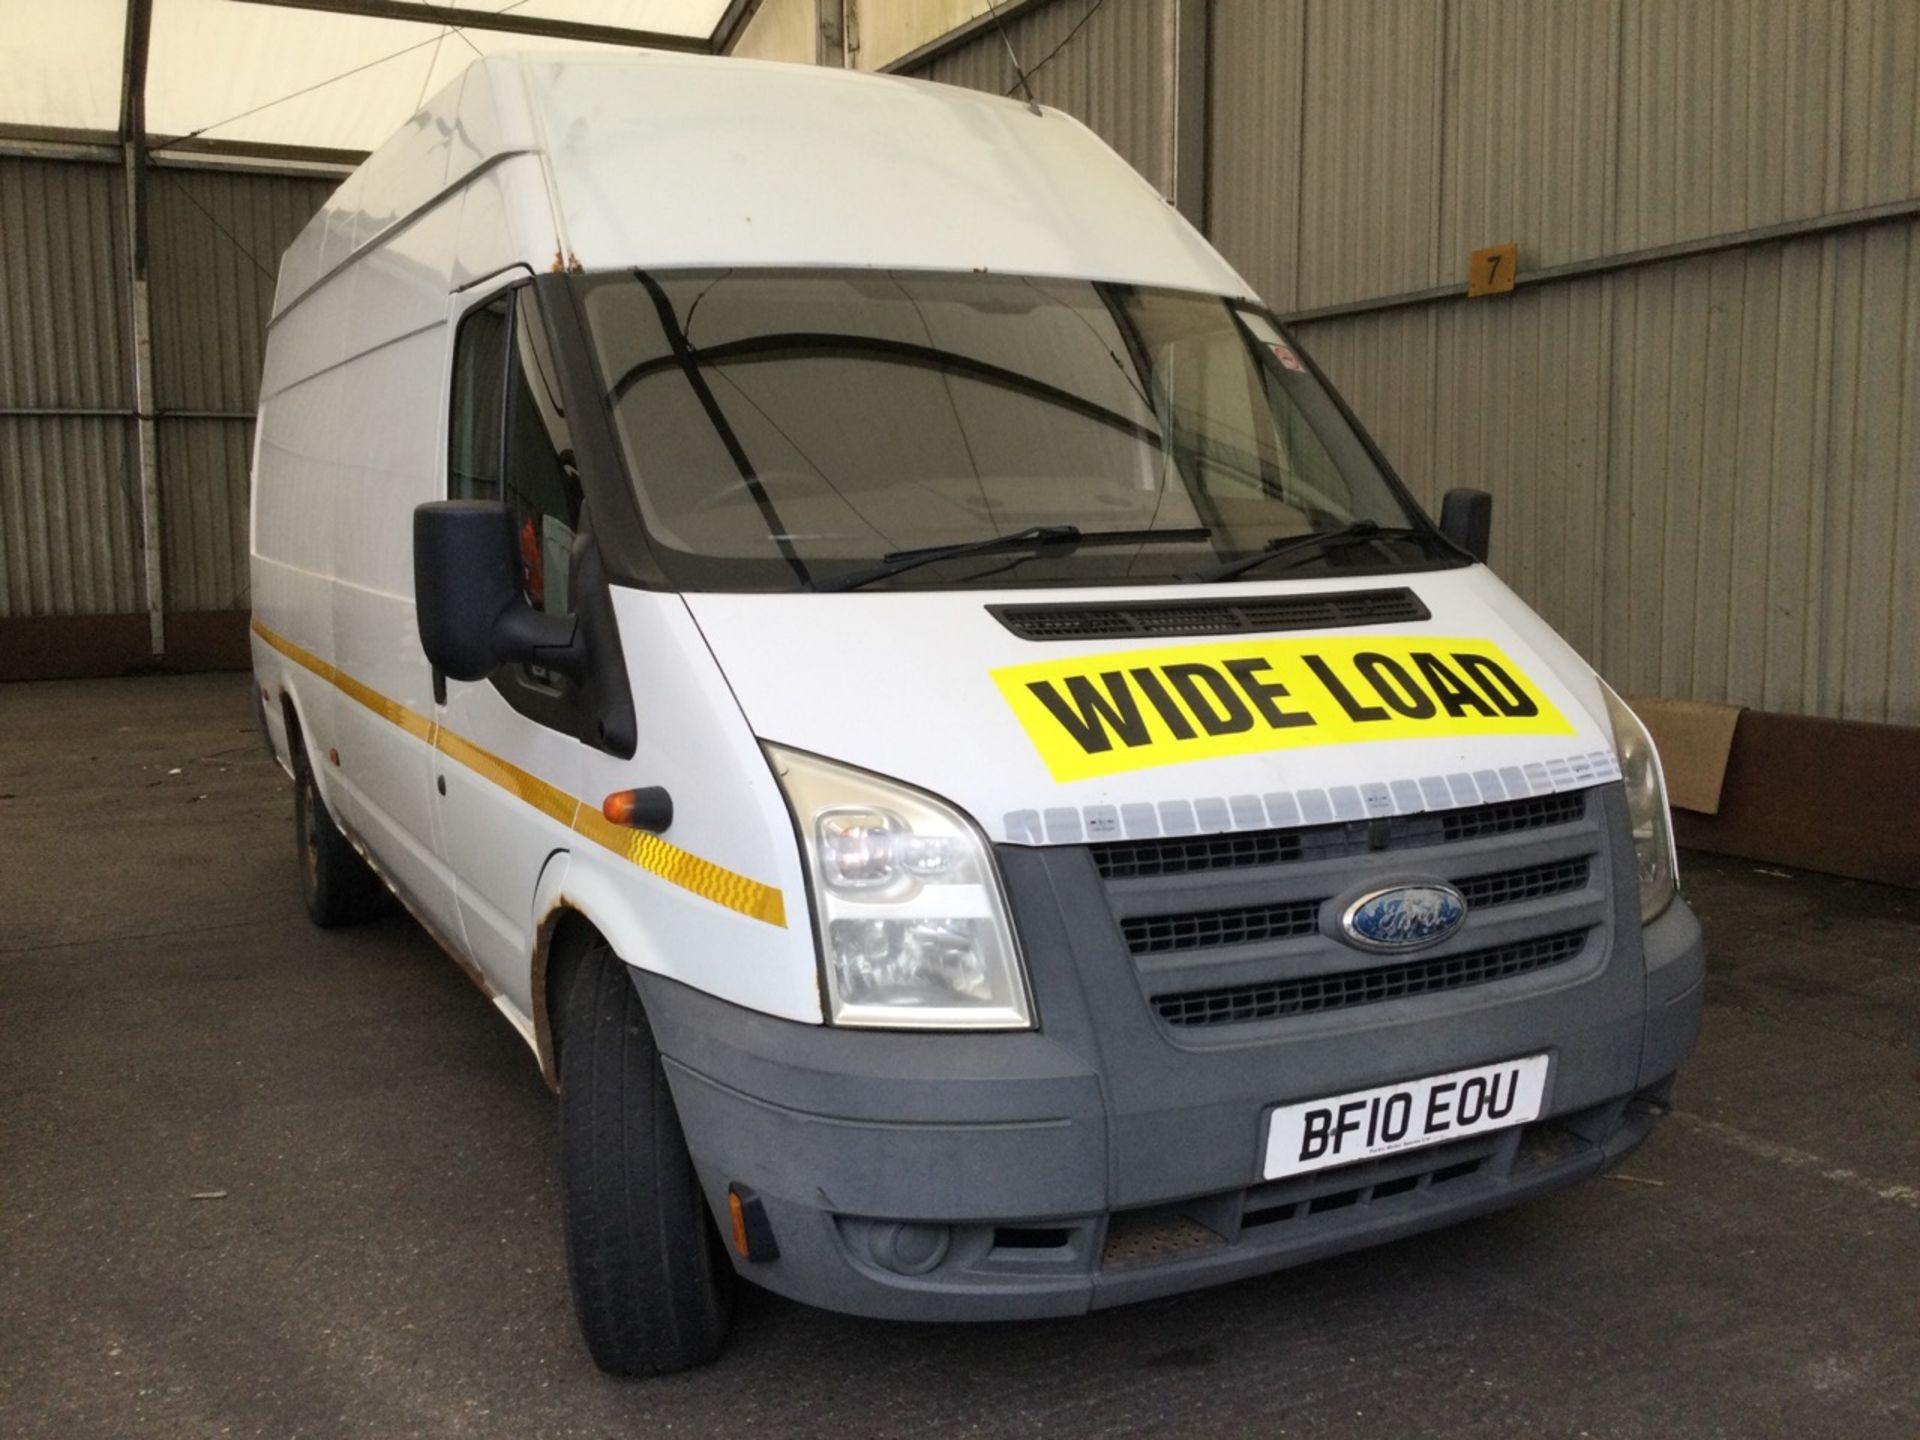 Ford TRANSIT 100 T350L Panel Van Escort Vehicle, Registration number BF10EOU , year 2010. Note - No - Image 3 of 4